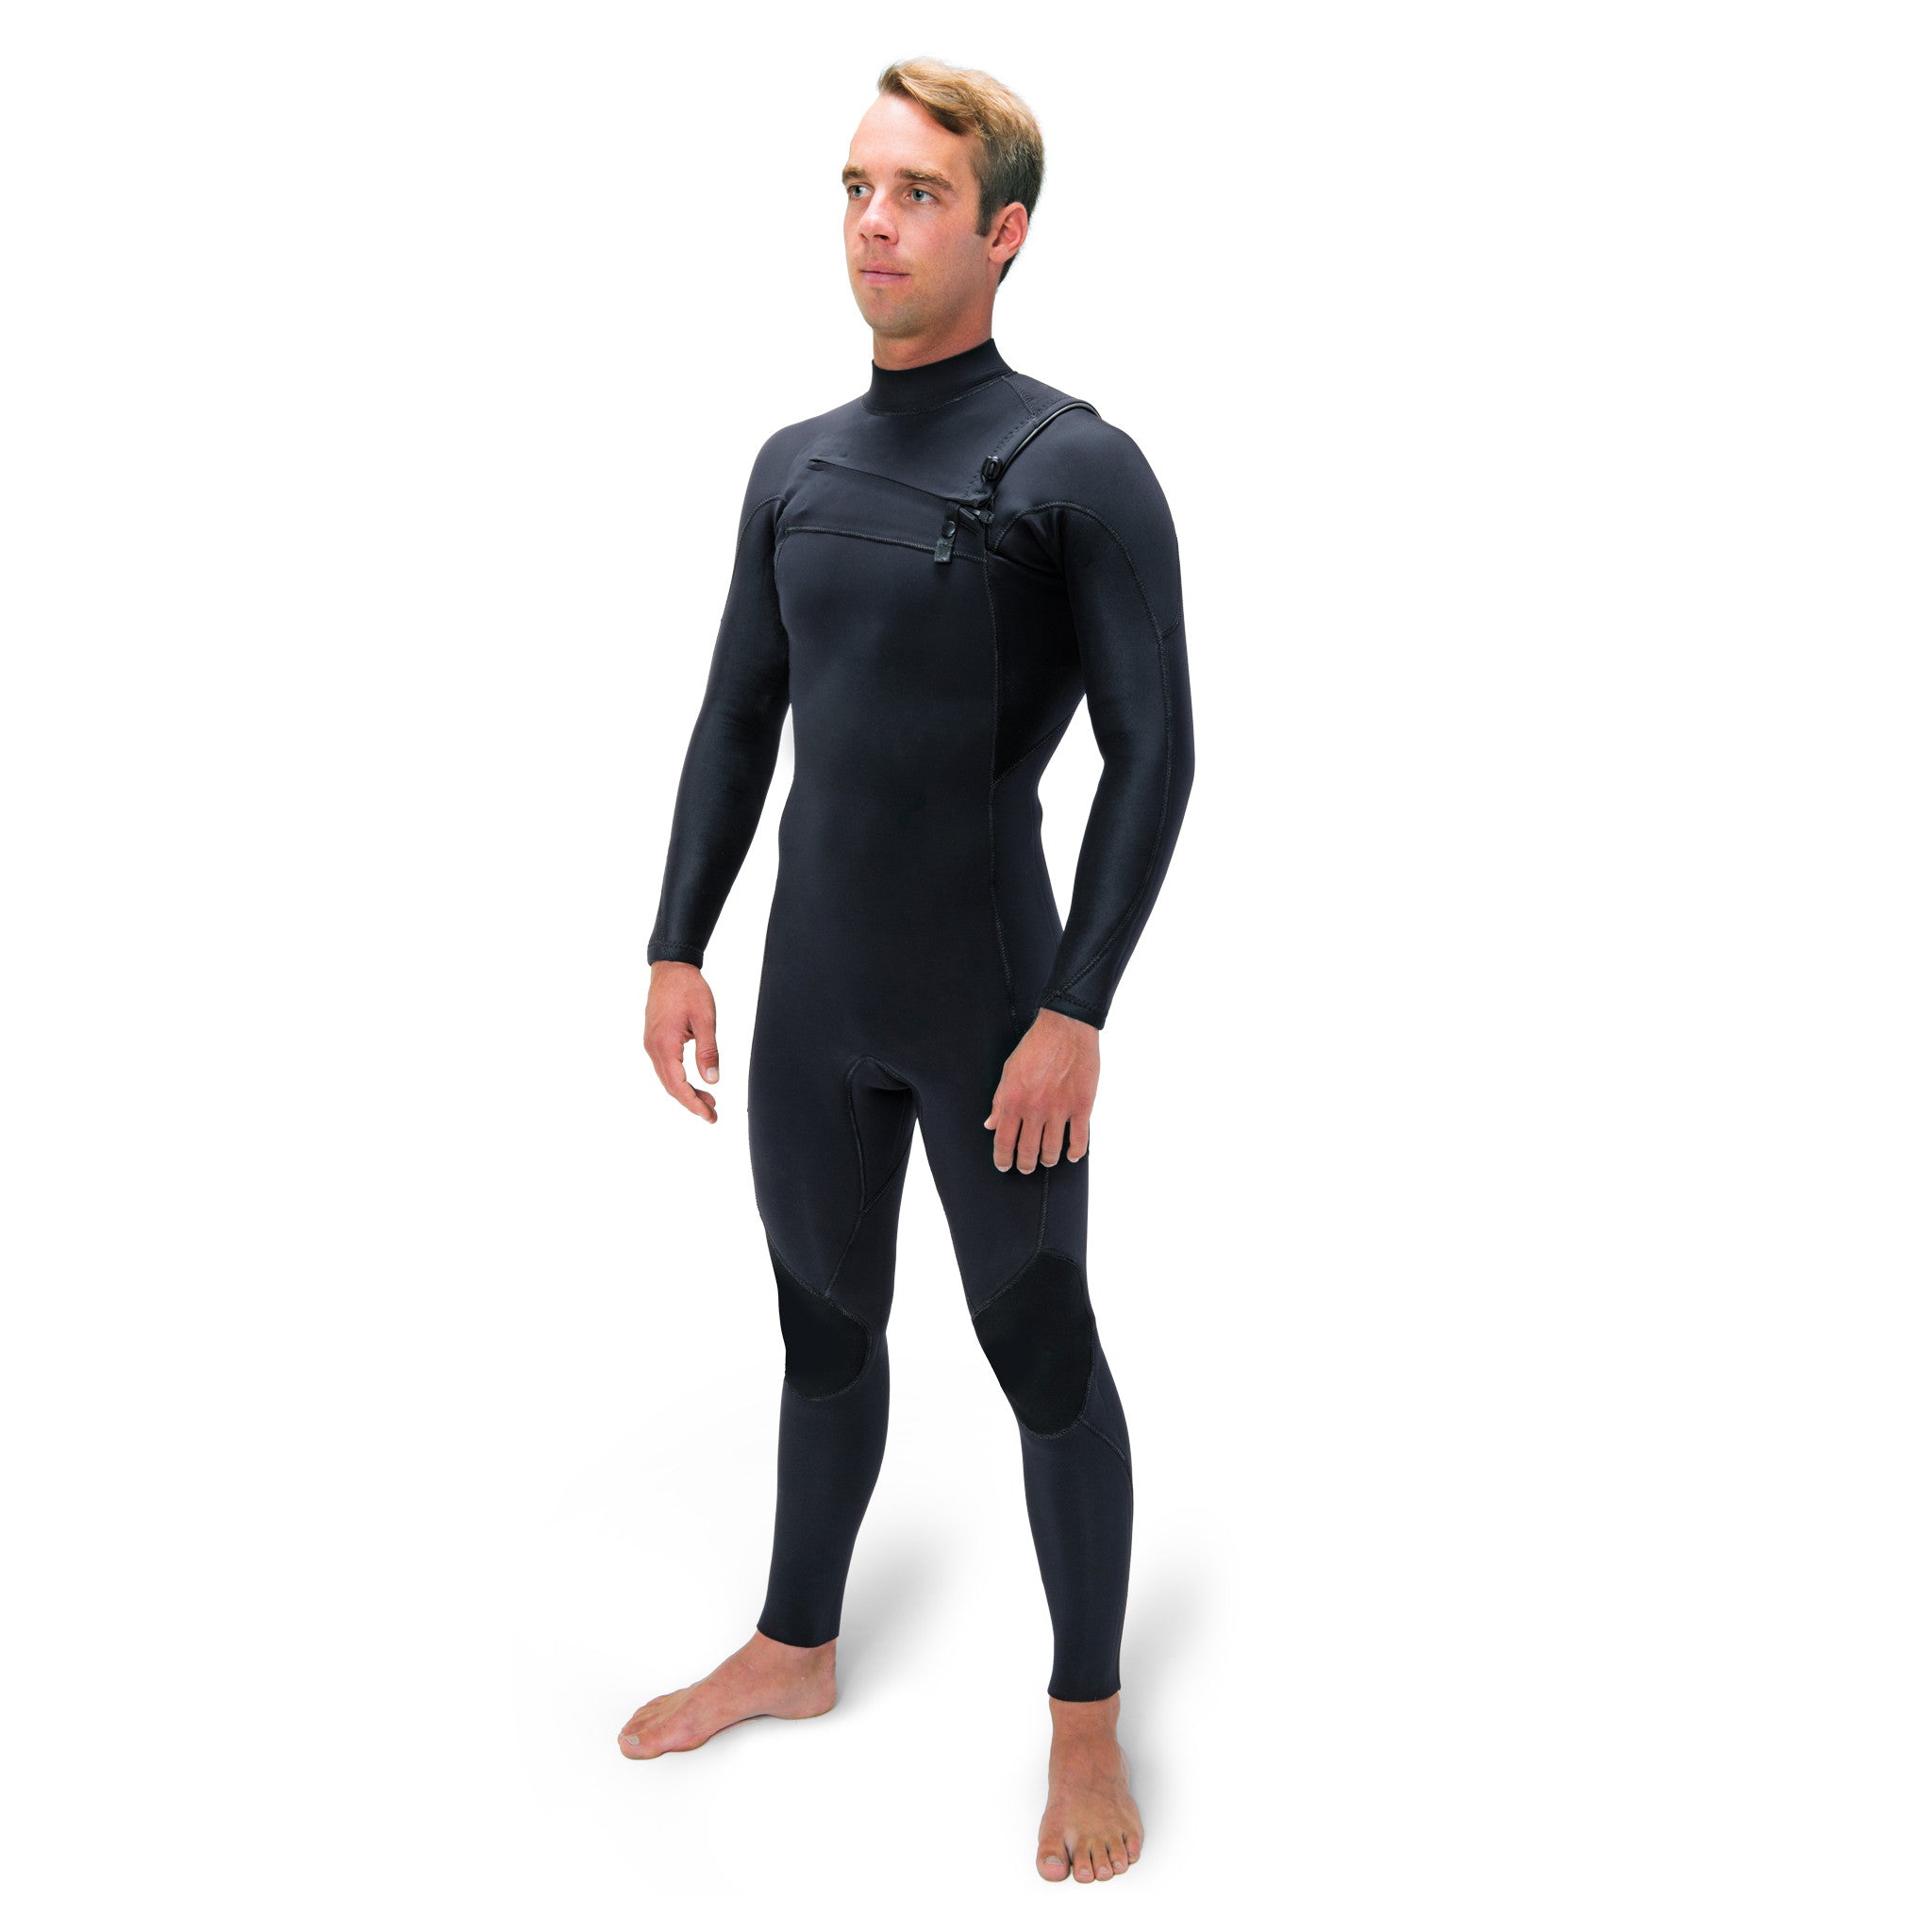 Groundswell Supply Custom Made Wetsuits (Full Suit)